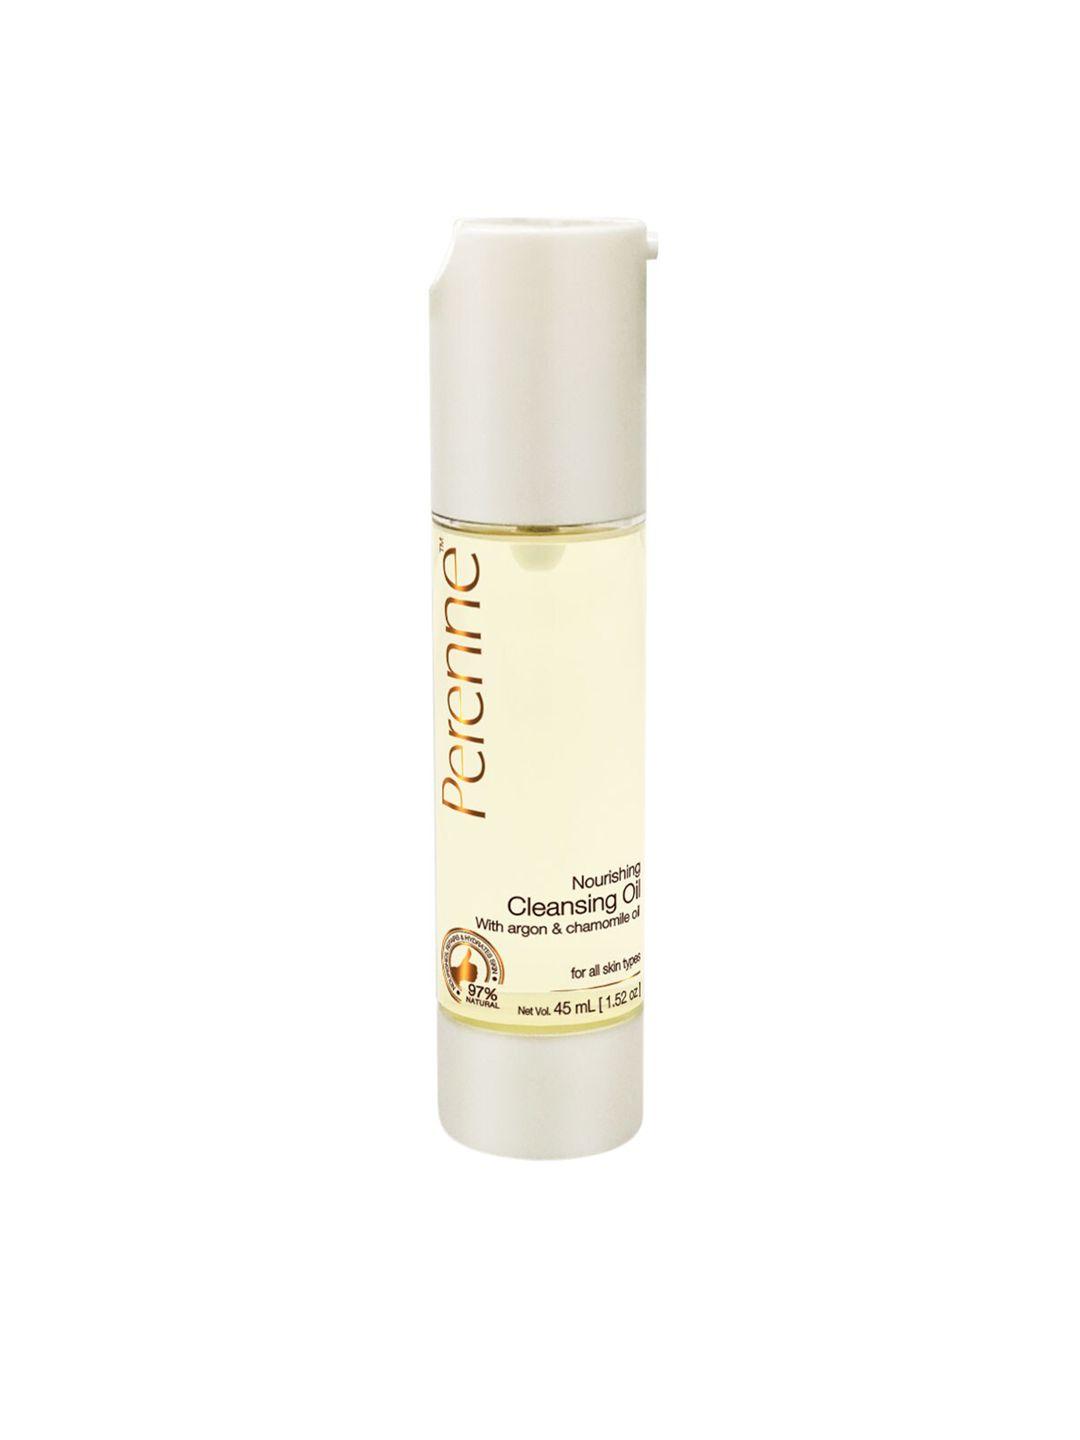 perenne nourishing cleansing oil with argan & chamomile oil - 45 ml